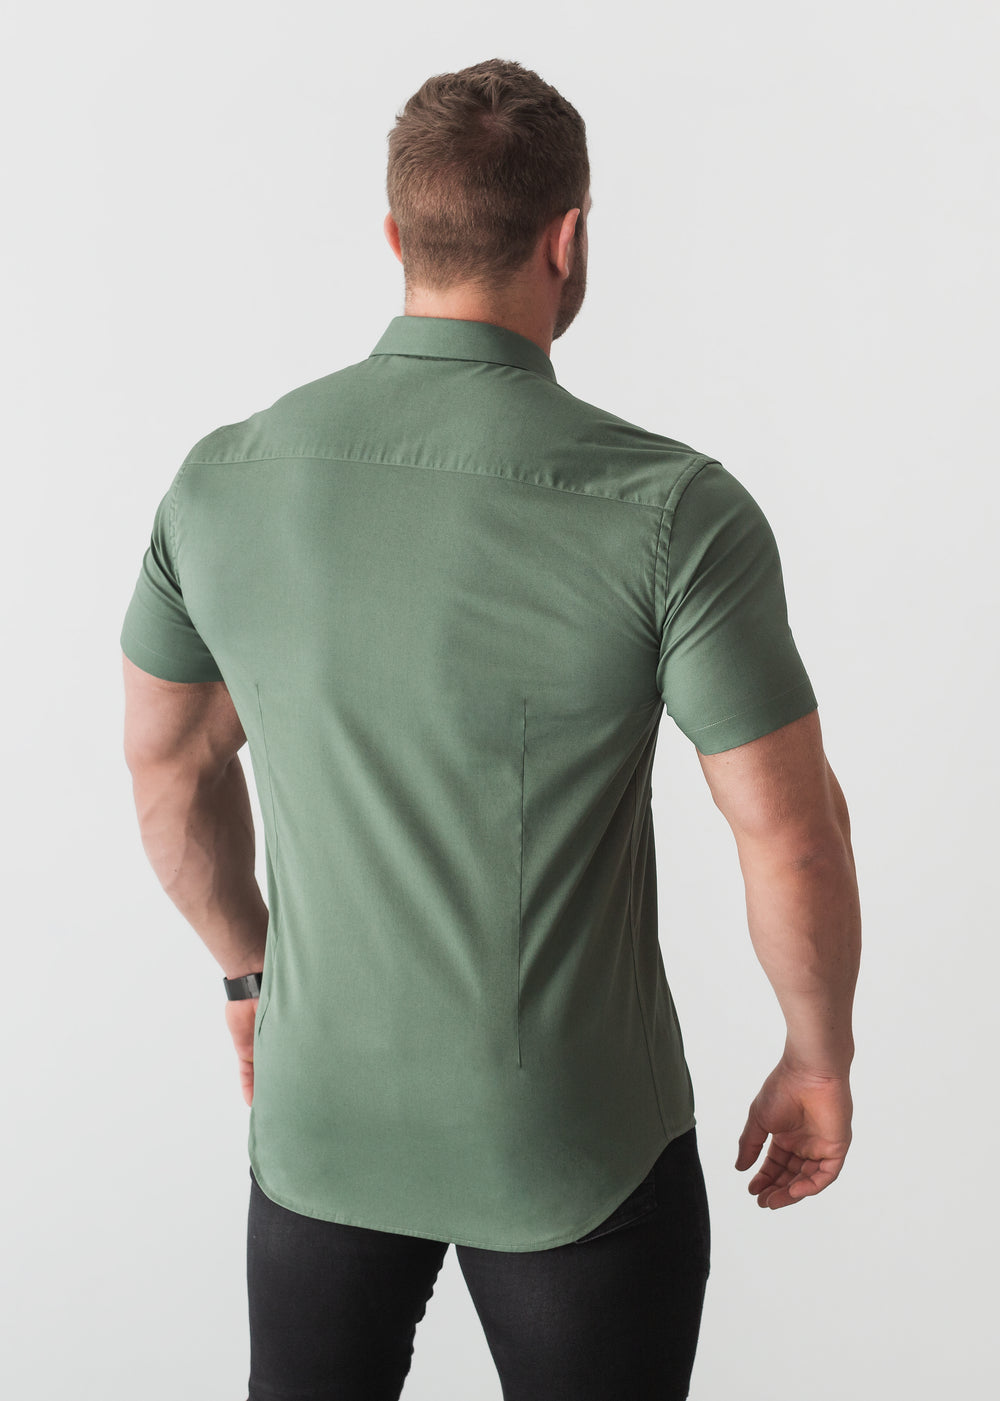 Olive tapered-fit shirt by Tapered Menswear, featuring a muscle-fit design for a flattering and well-defined silhouette.